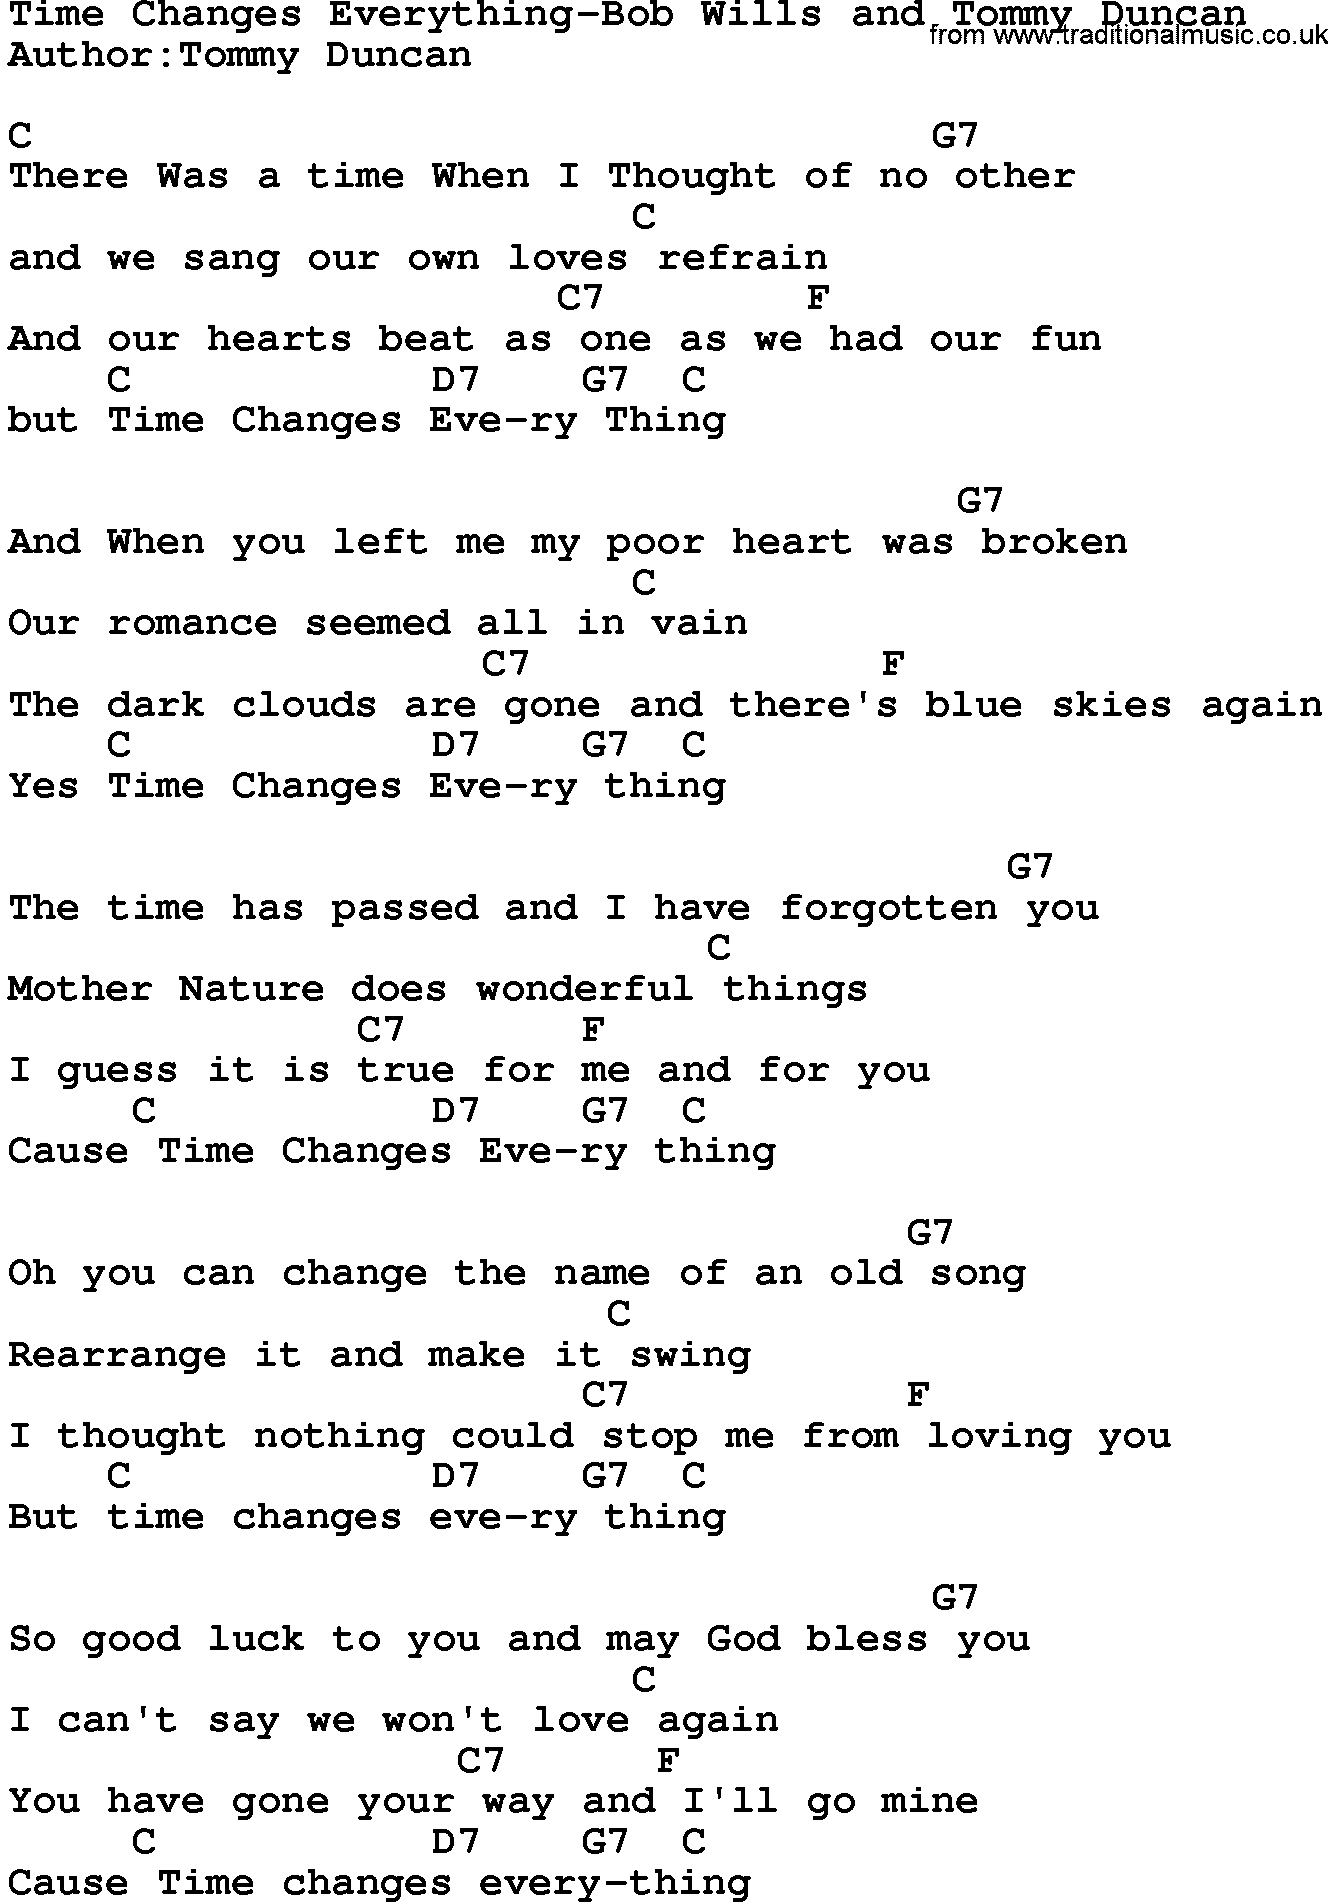 Country music song: Time Changes Everything-Bob Wills And Tommy Duncan lyrics and chords